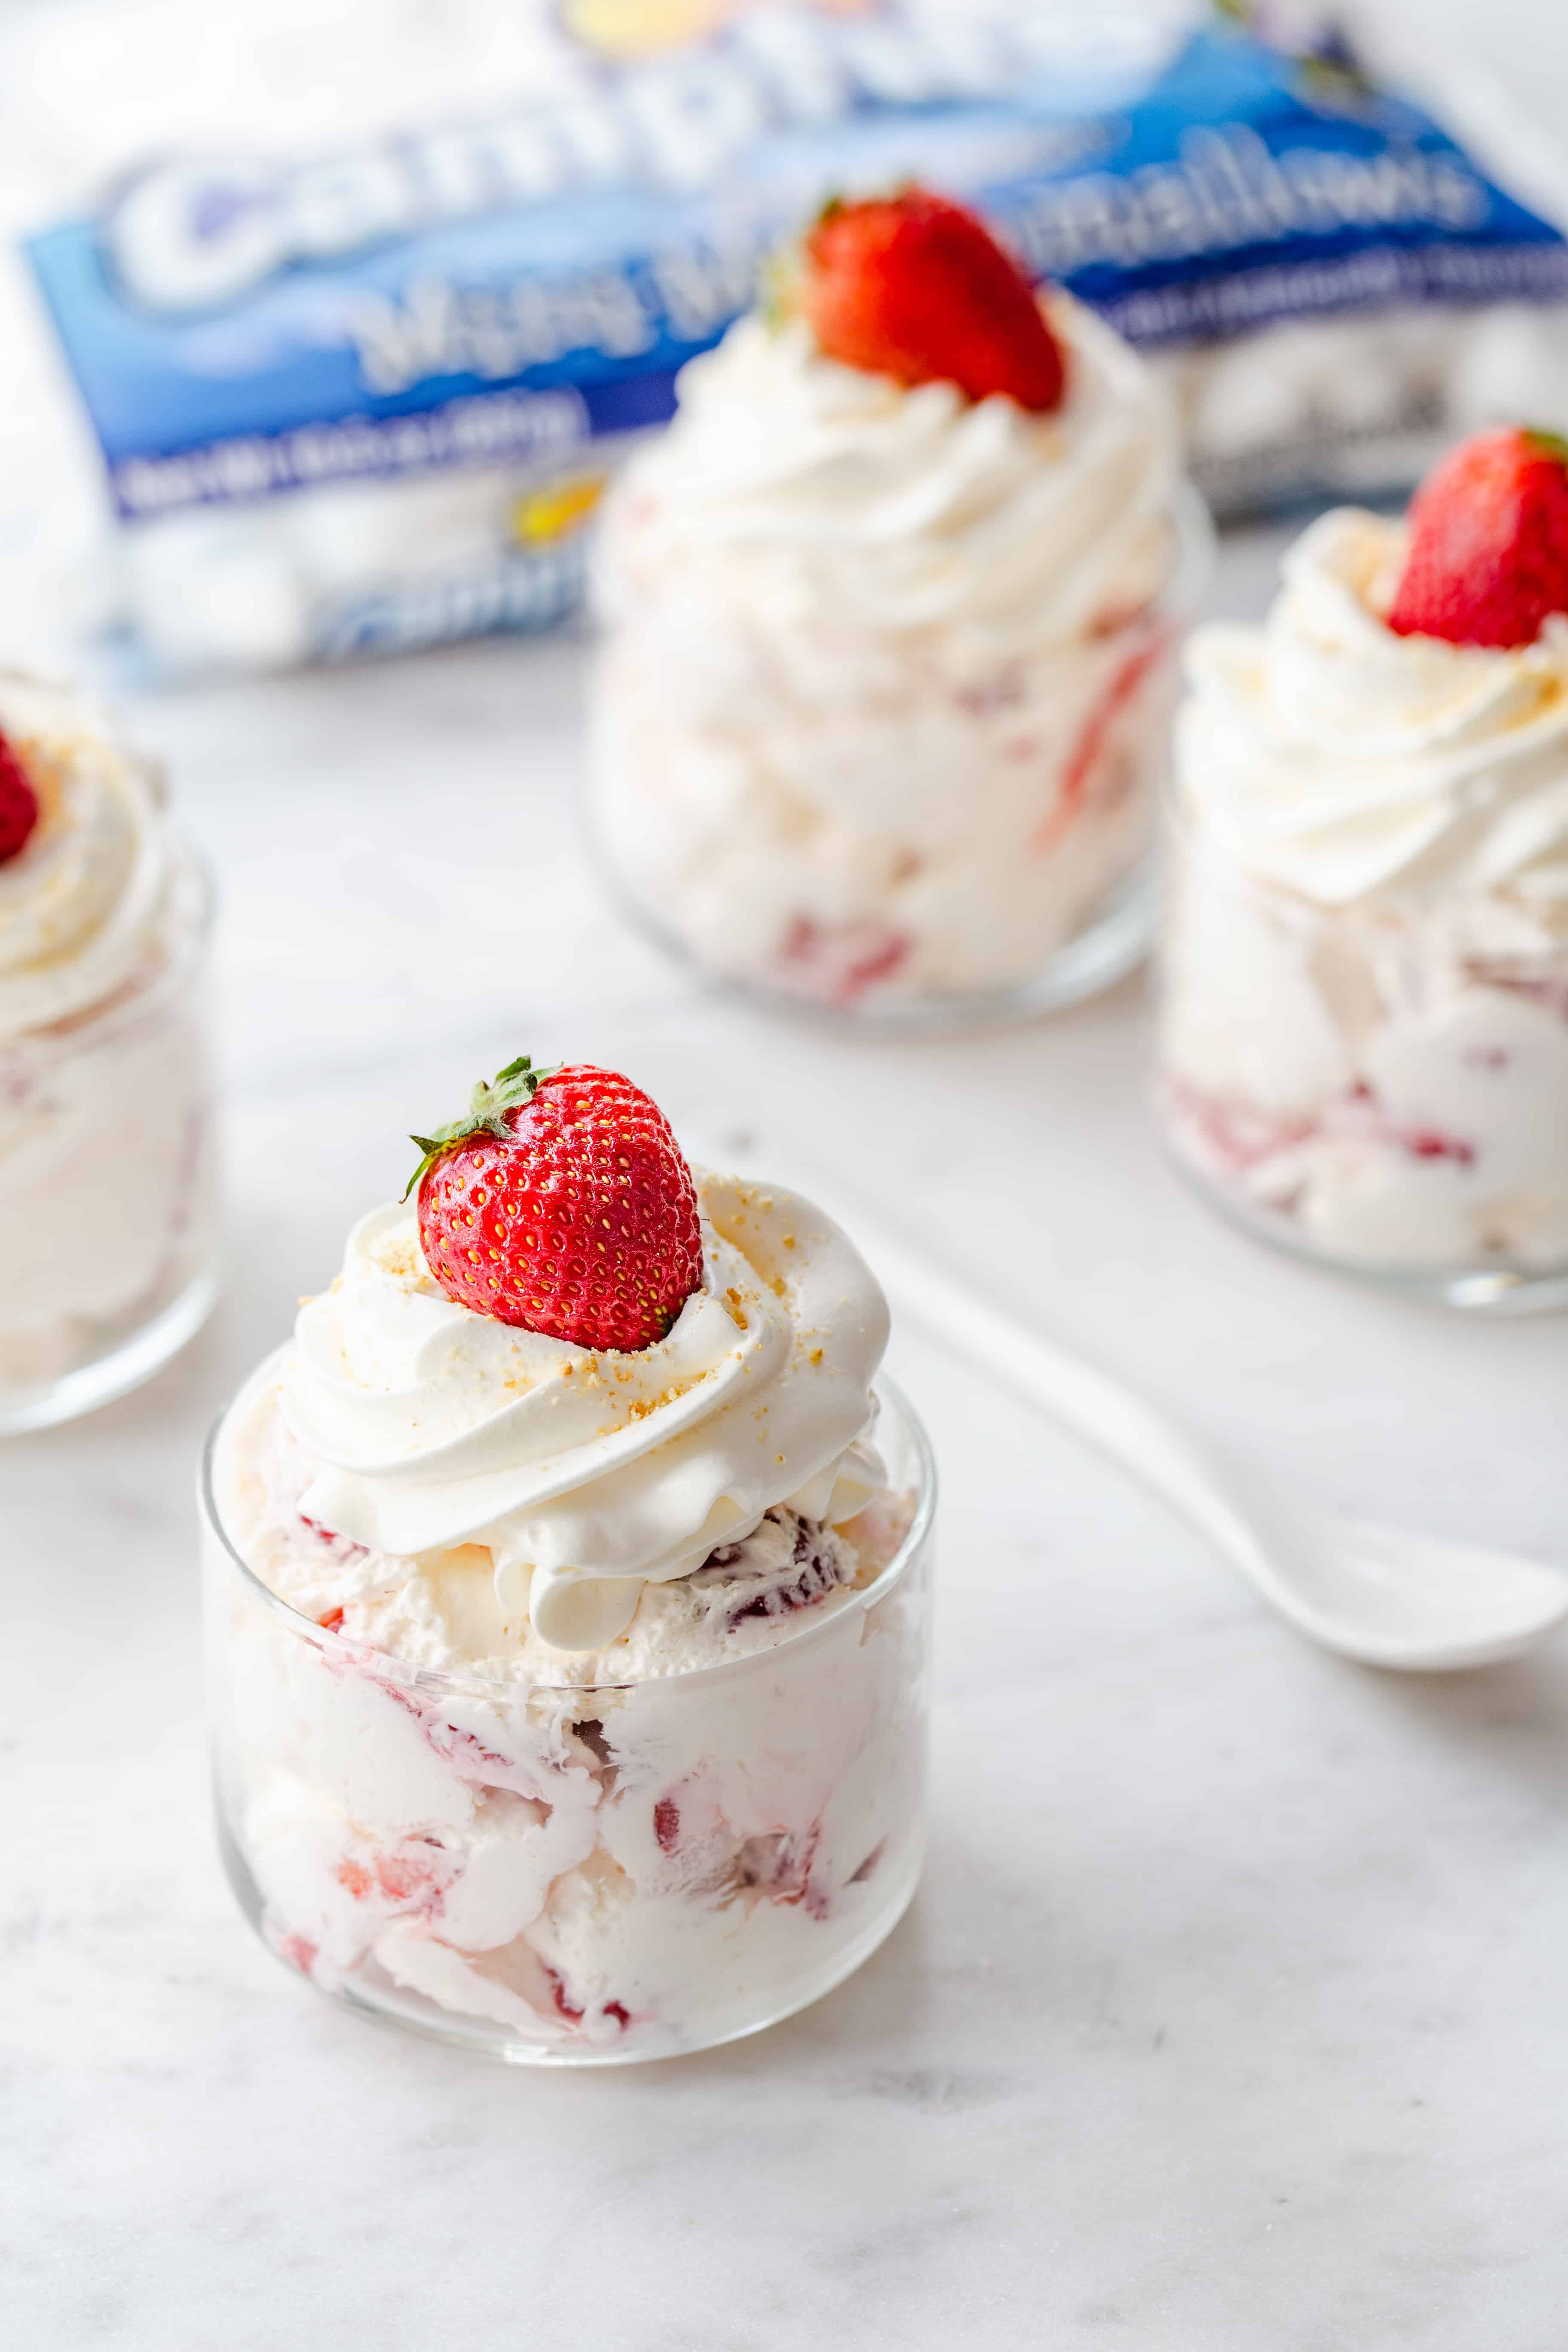 Strawberry Cheesecake Fluff is simple, delicious and perfect for any occasion. Grab a spoon and dig in!